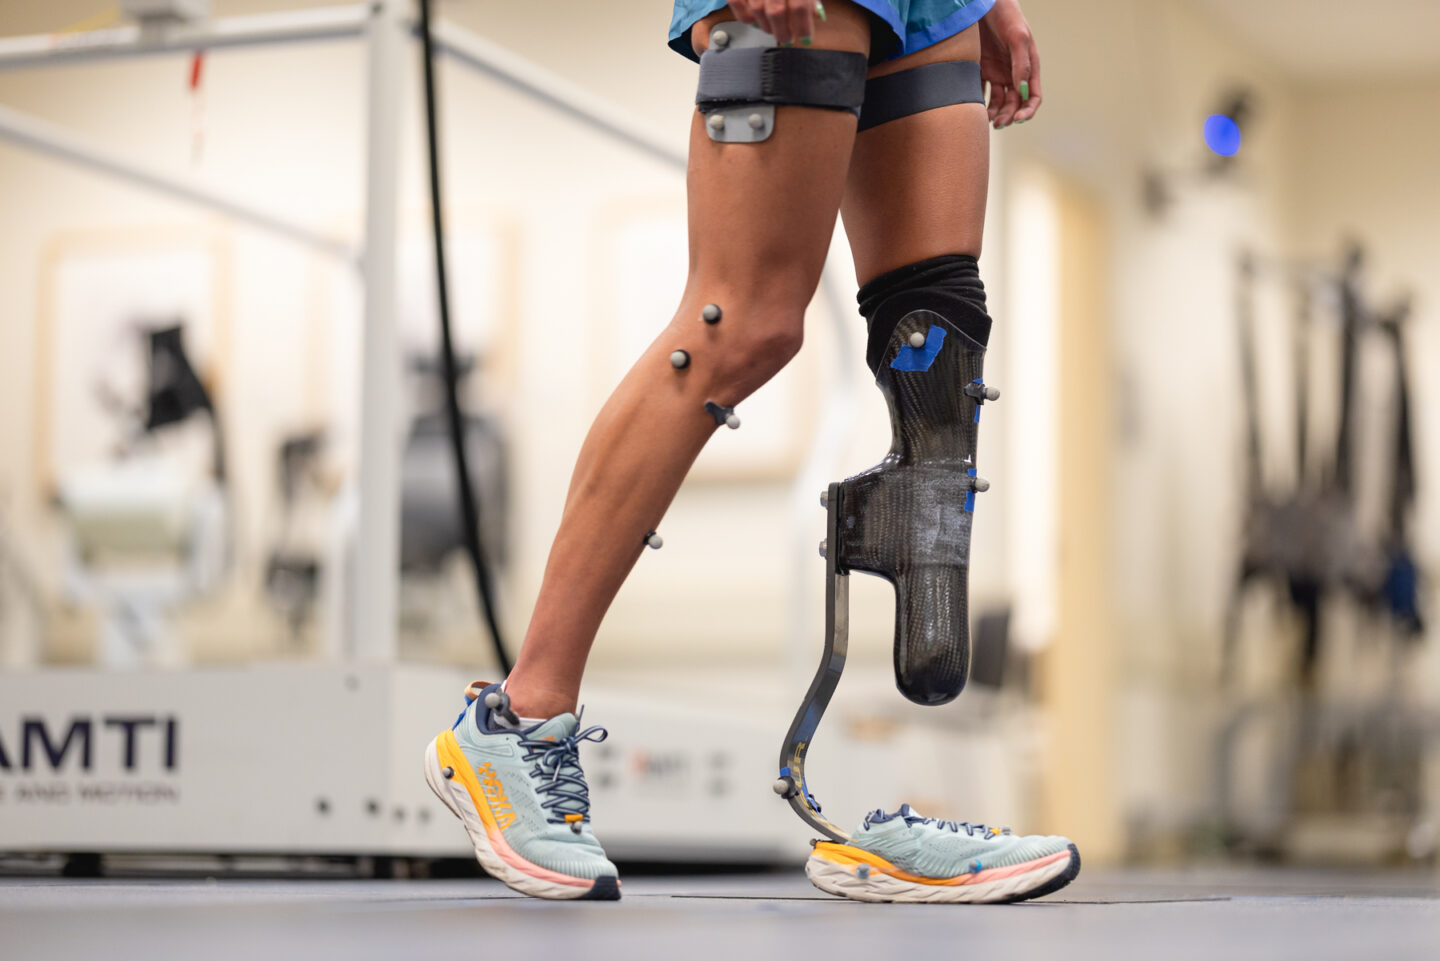 Close-up of prosthetic leg with motion capture markers for biomechanics study.